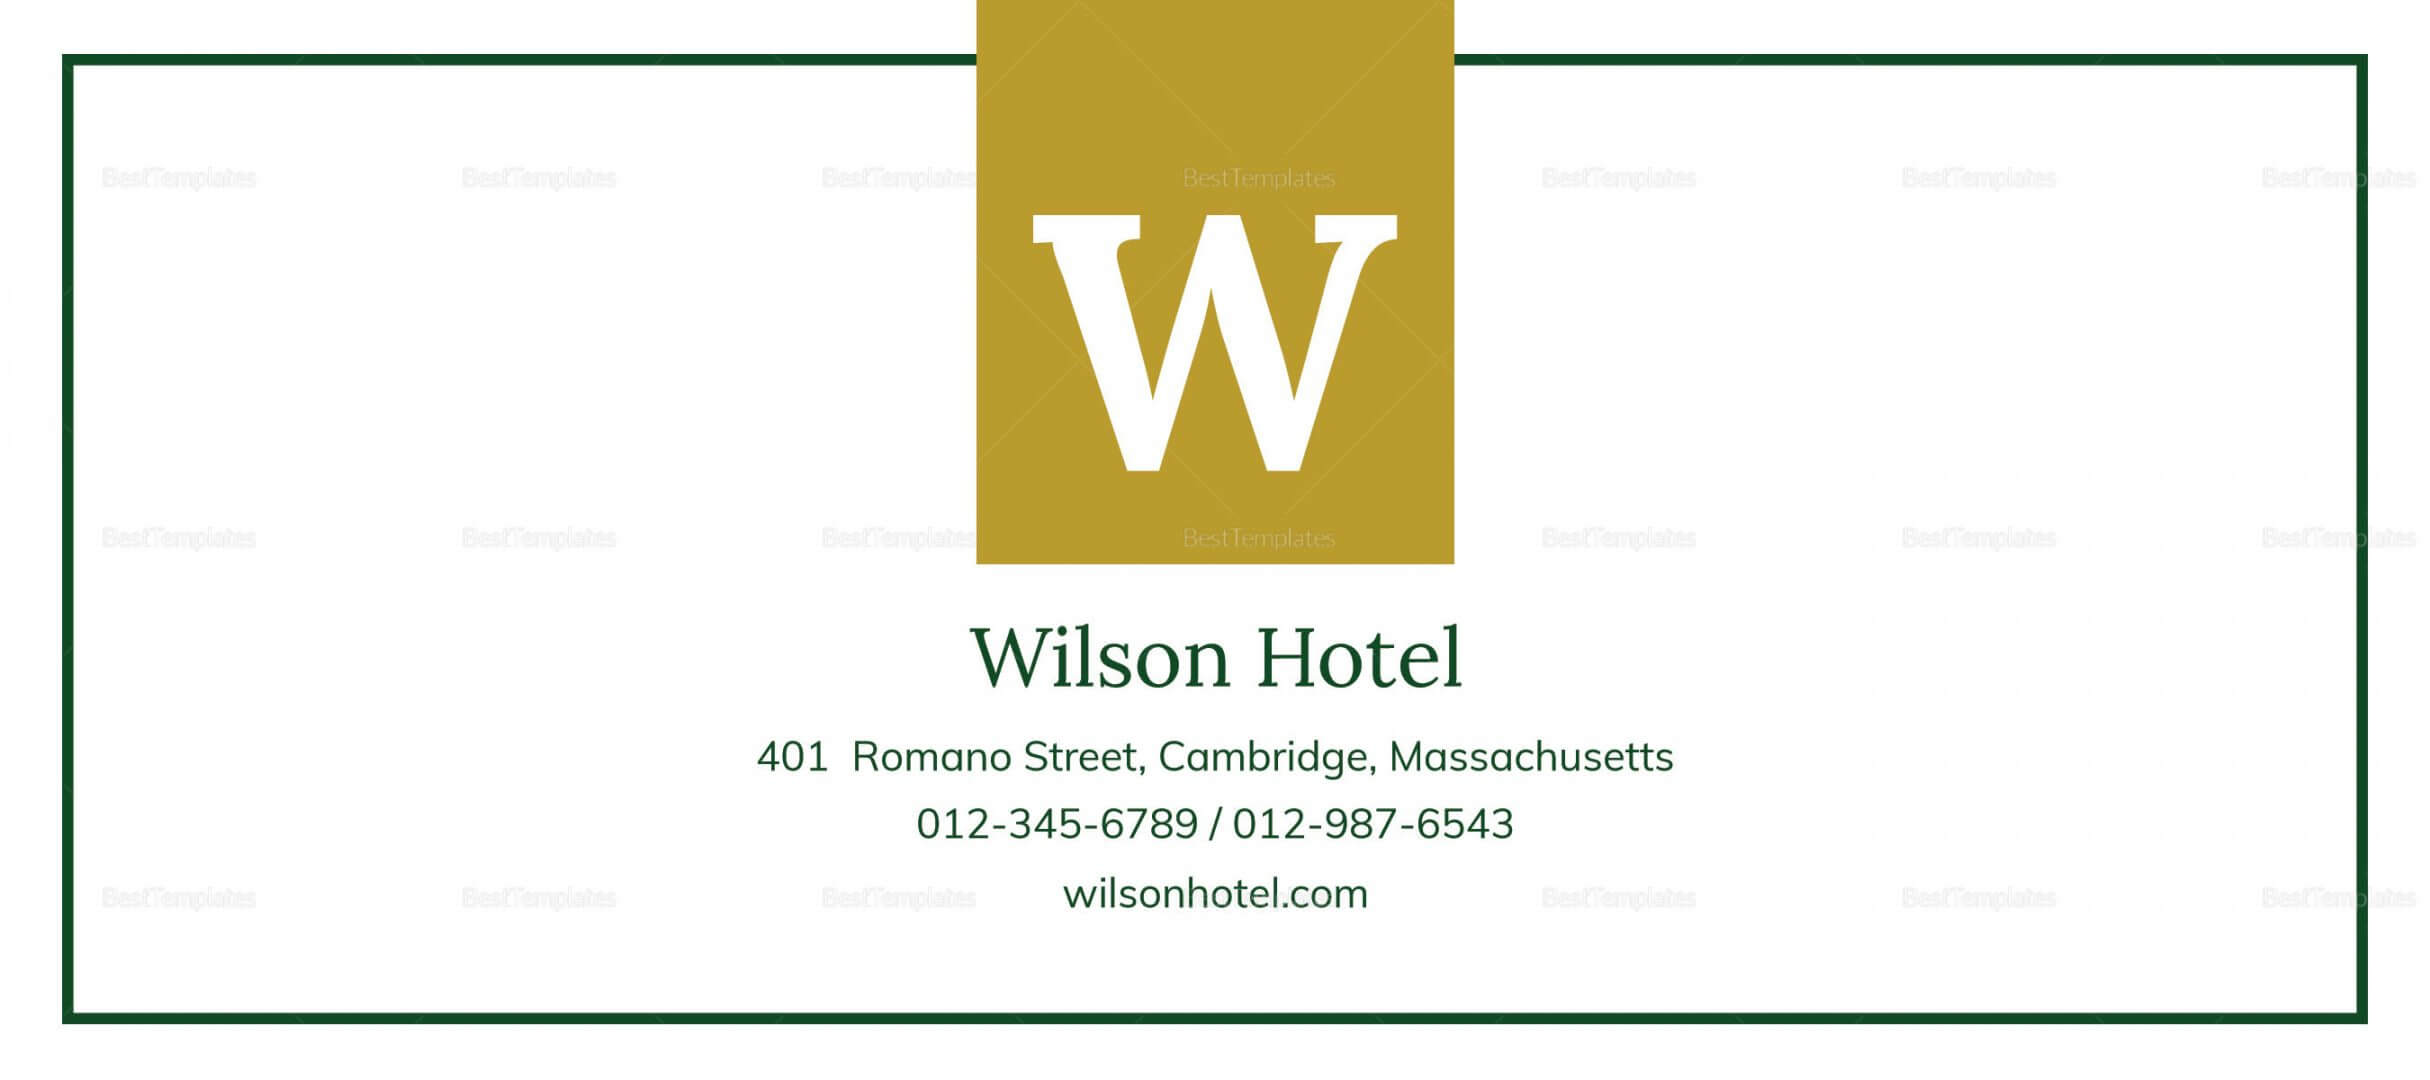 Free Hotel Gift Certificate Design Template In Psd Word Inside Publisher Gift Certificate Template